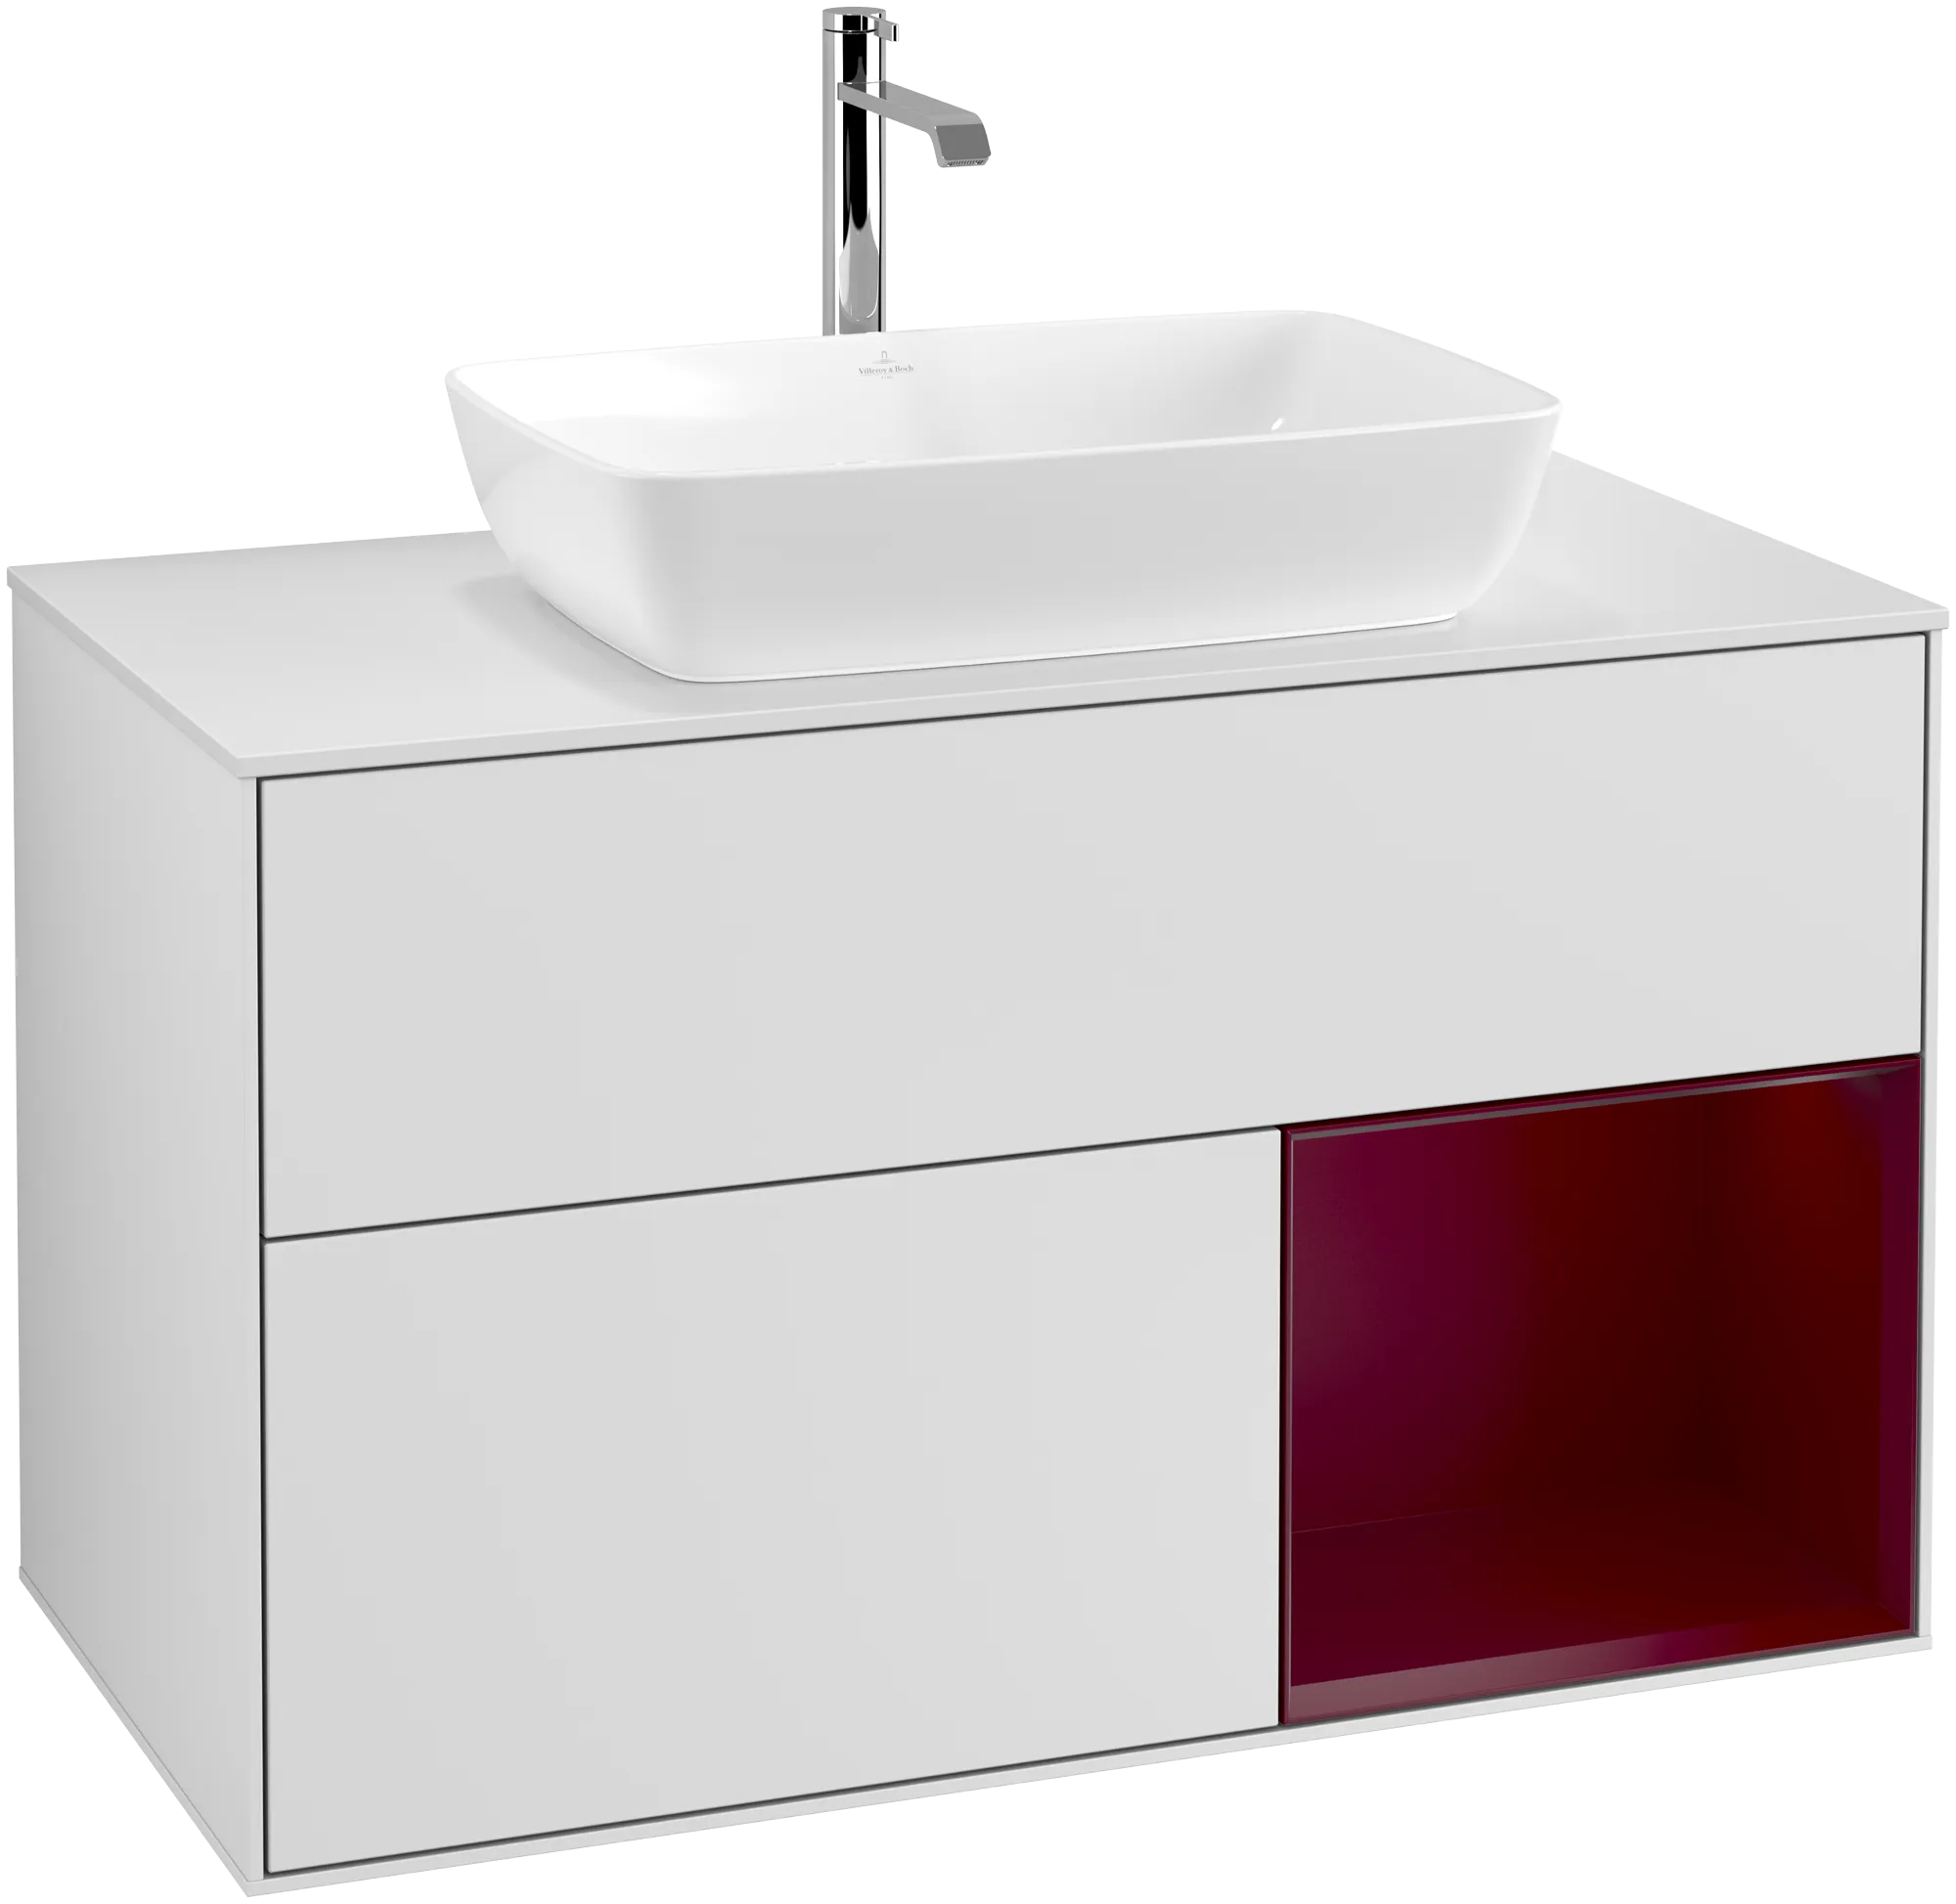 Picture of VILLEROY BOCH Finion Vanity unit, with lighting, 2 pull-out compartments, 1000 x 603 x 501 mm, White Matt Lacquer / Peony Matt Lacquer / Glass White Matt #G781HBMT